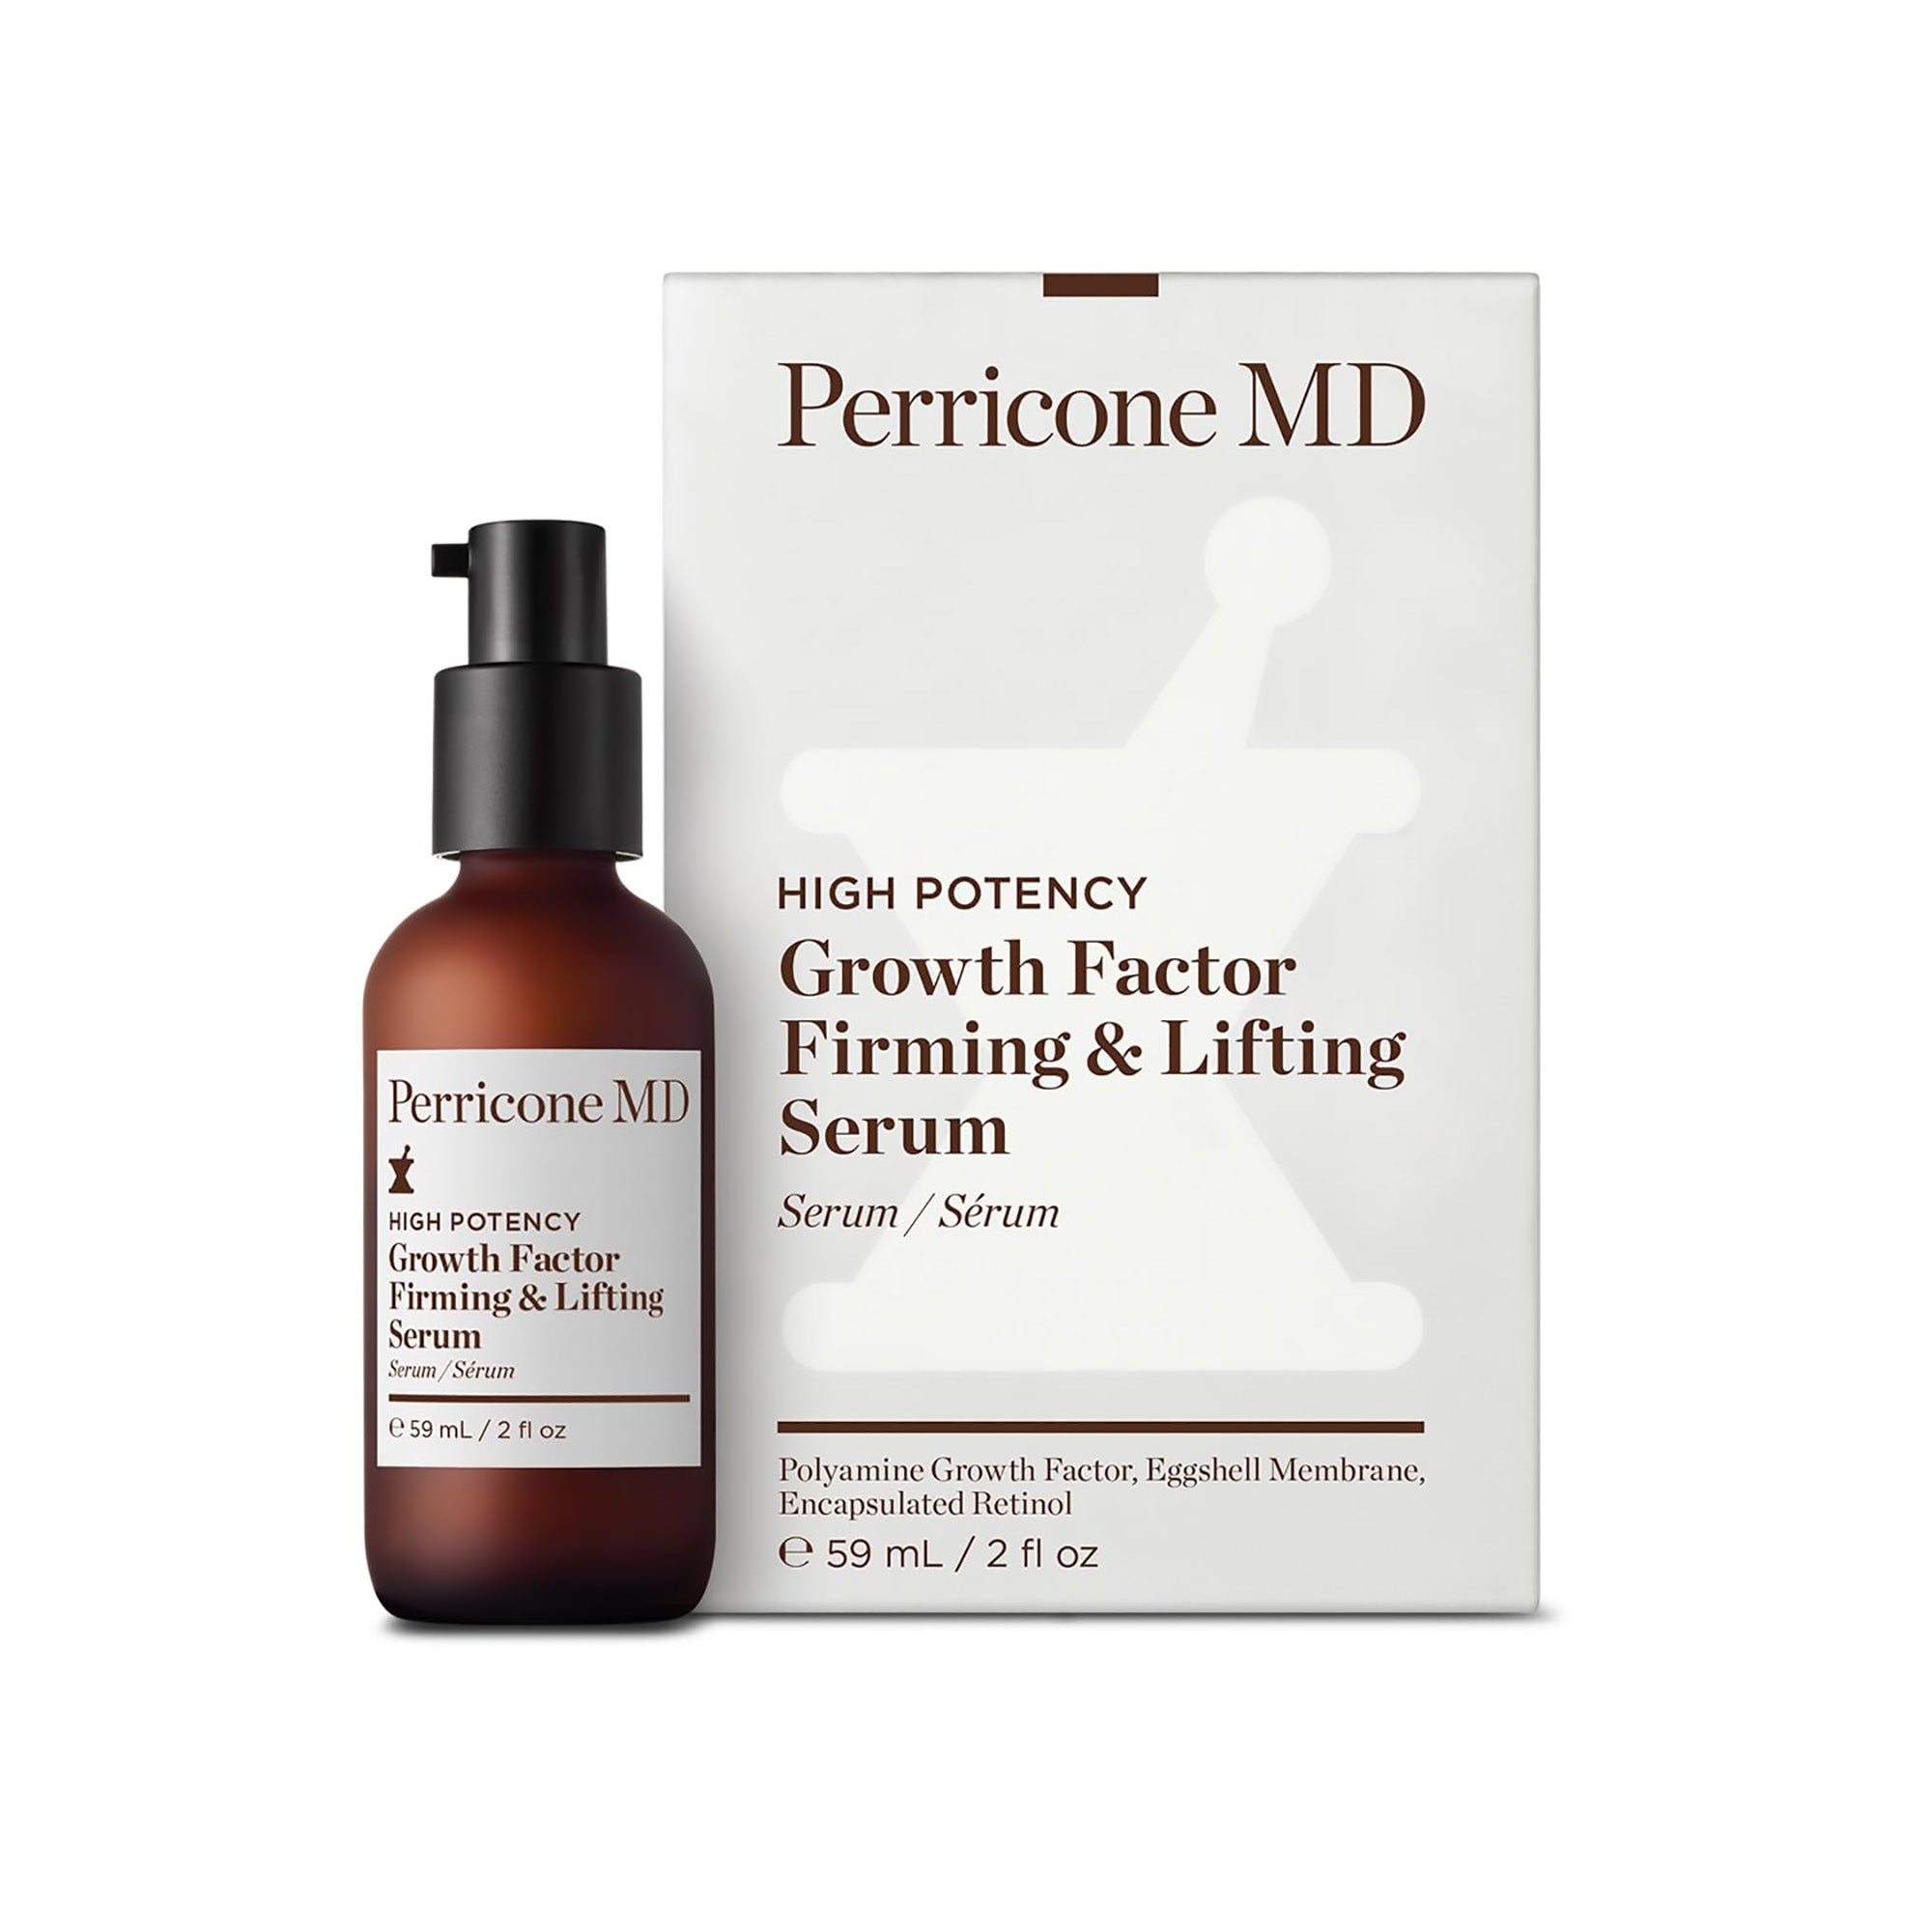 Perricone MD High Potency Classics Face Firming Serum / 2OZ